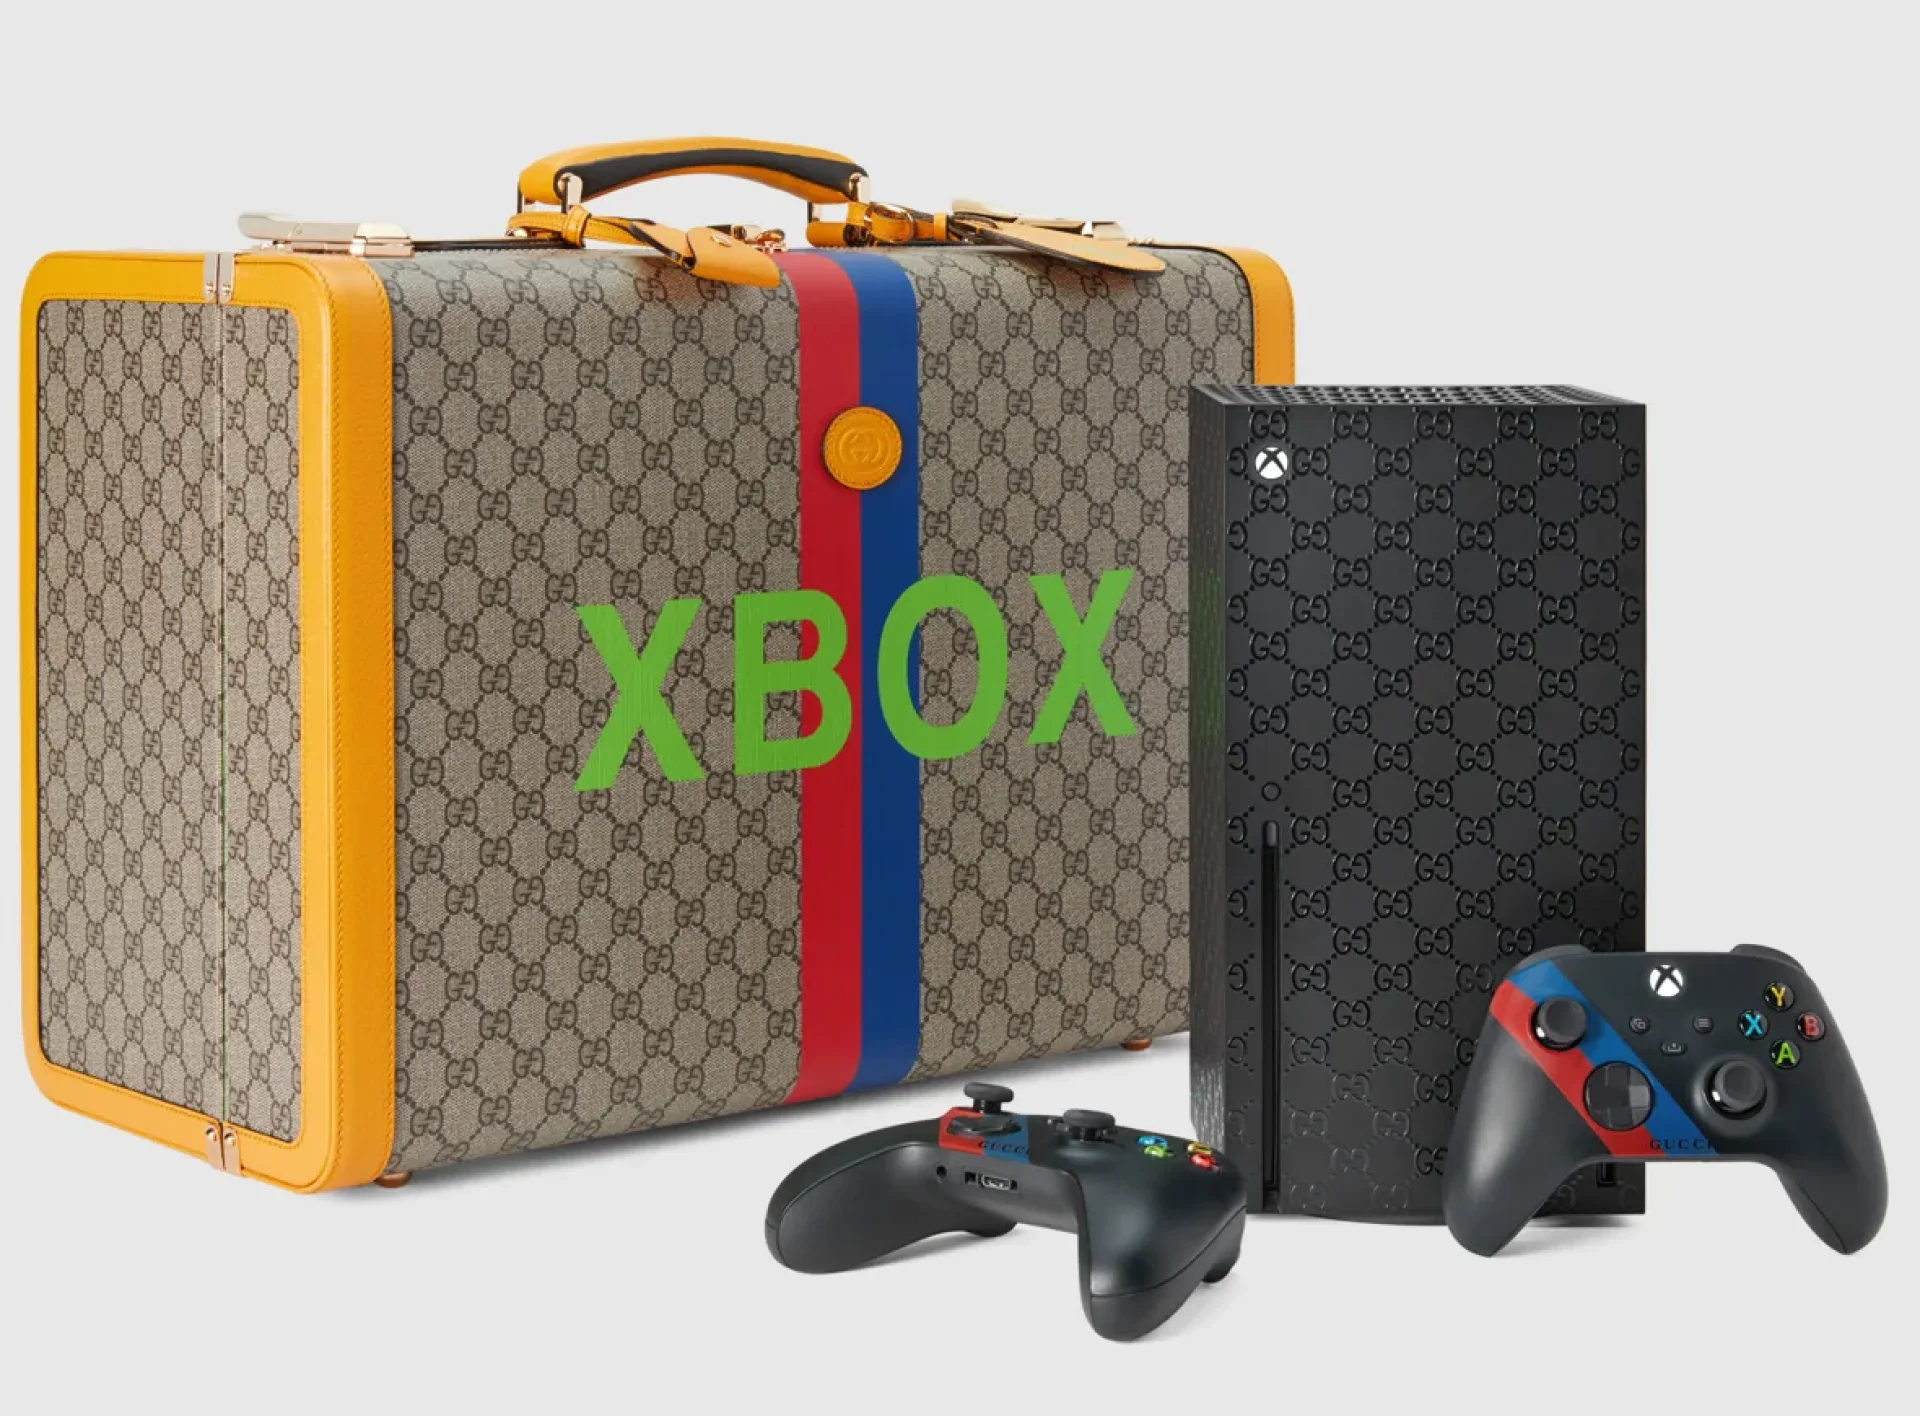 Xbox Meets Gucci with a Limited Edition Xbox Series X Console!